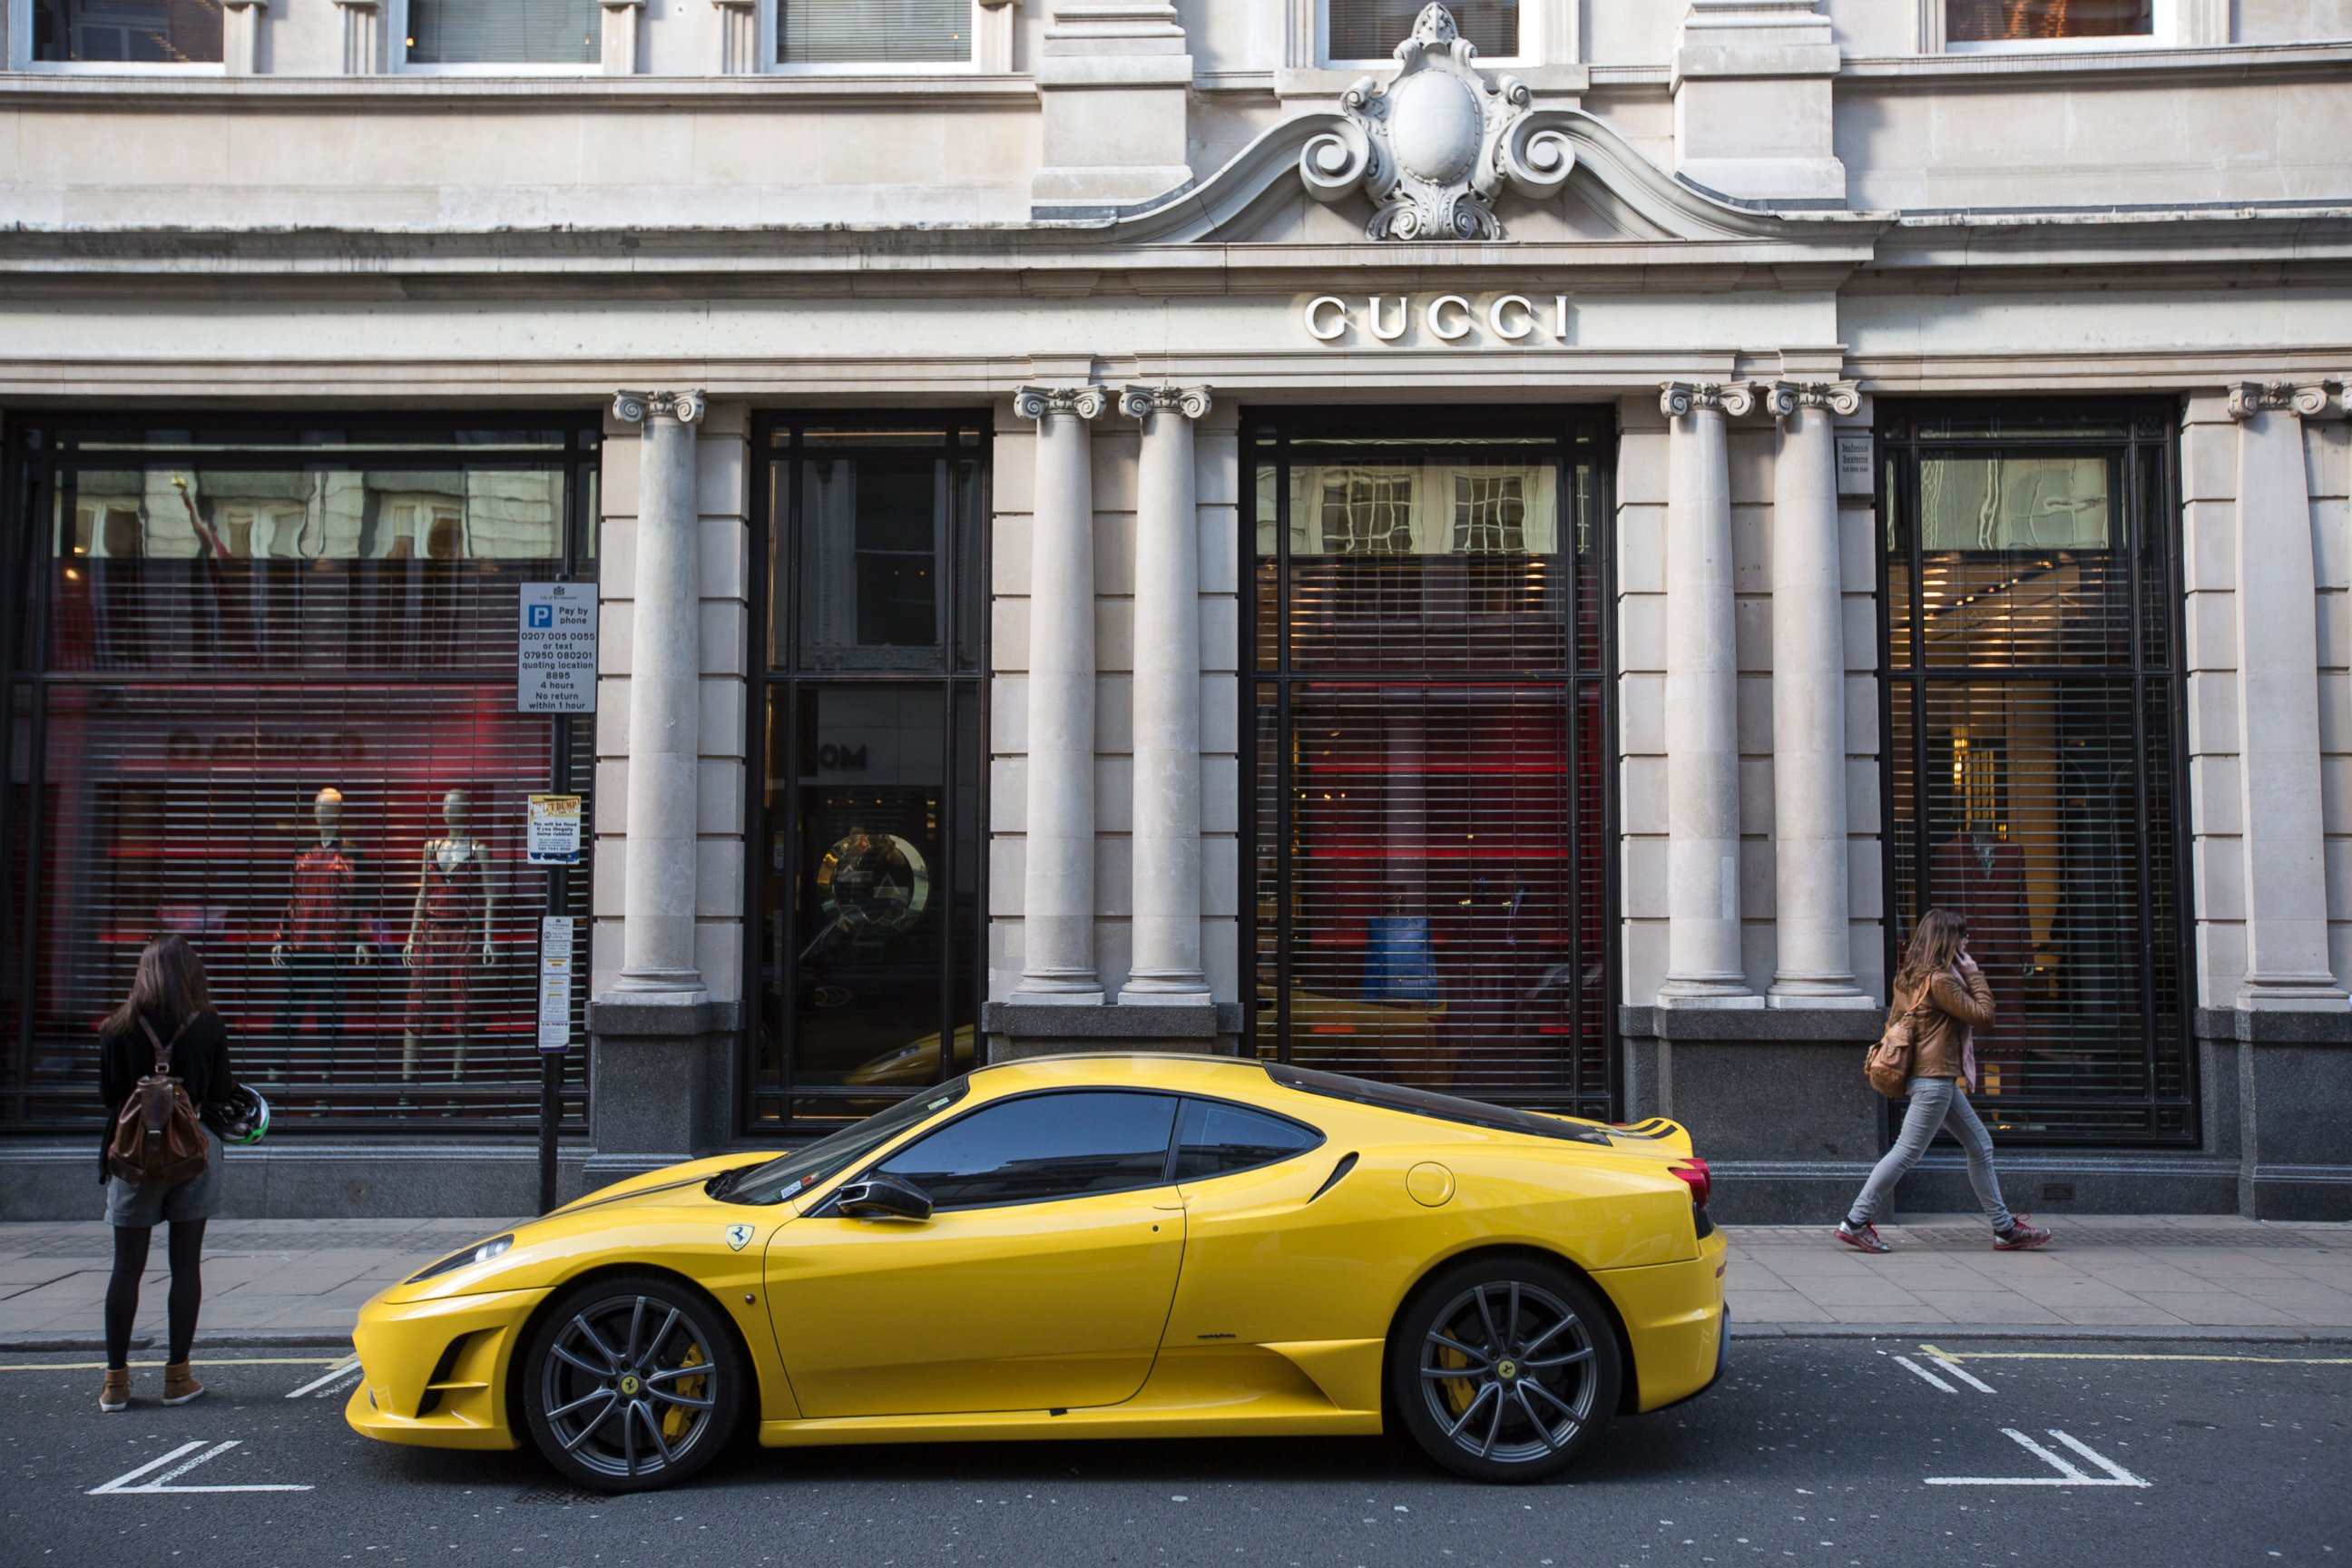 PHOTO: A yellow Lamborghini is parked outside Gucci on Old Bond Street on April 15, 2014 in London, England.